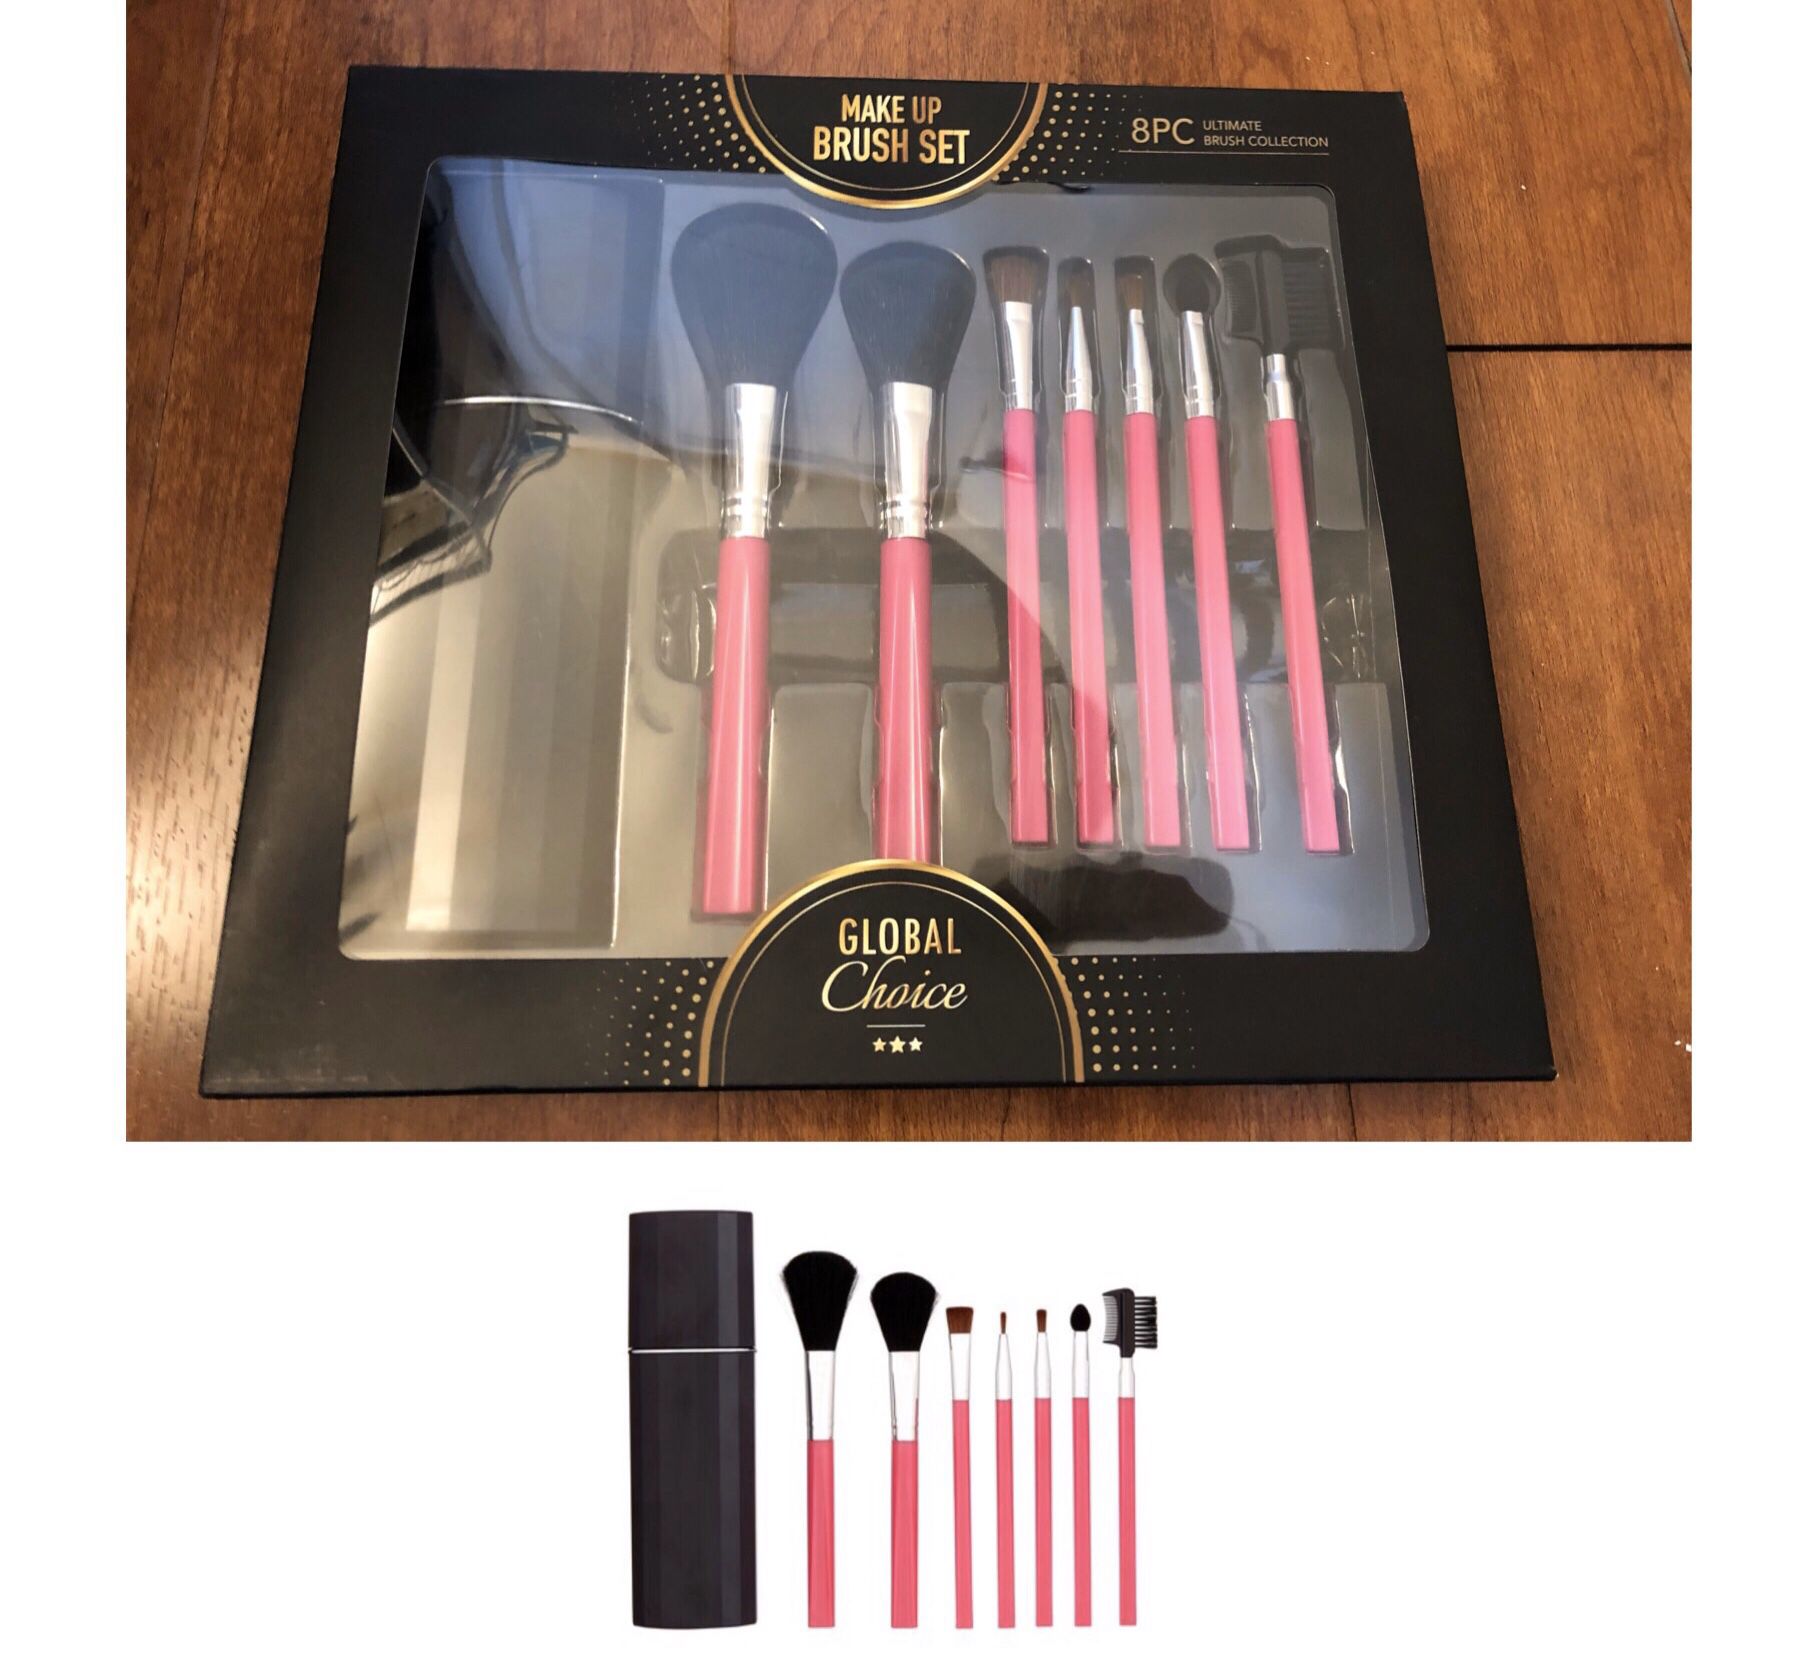 Brand new 8-piece Pink Makeup Brush Travel Set.(pick up only